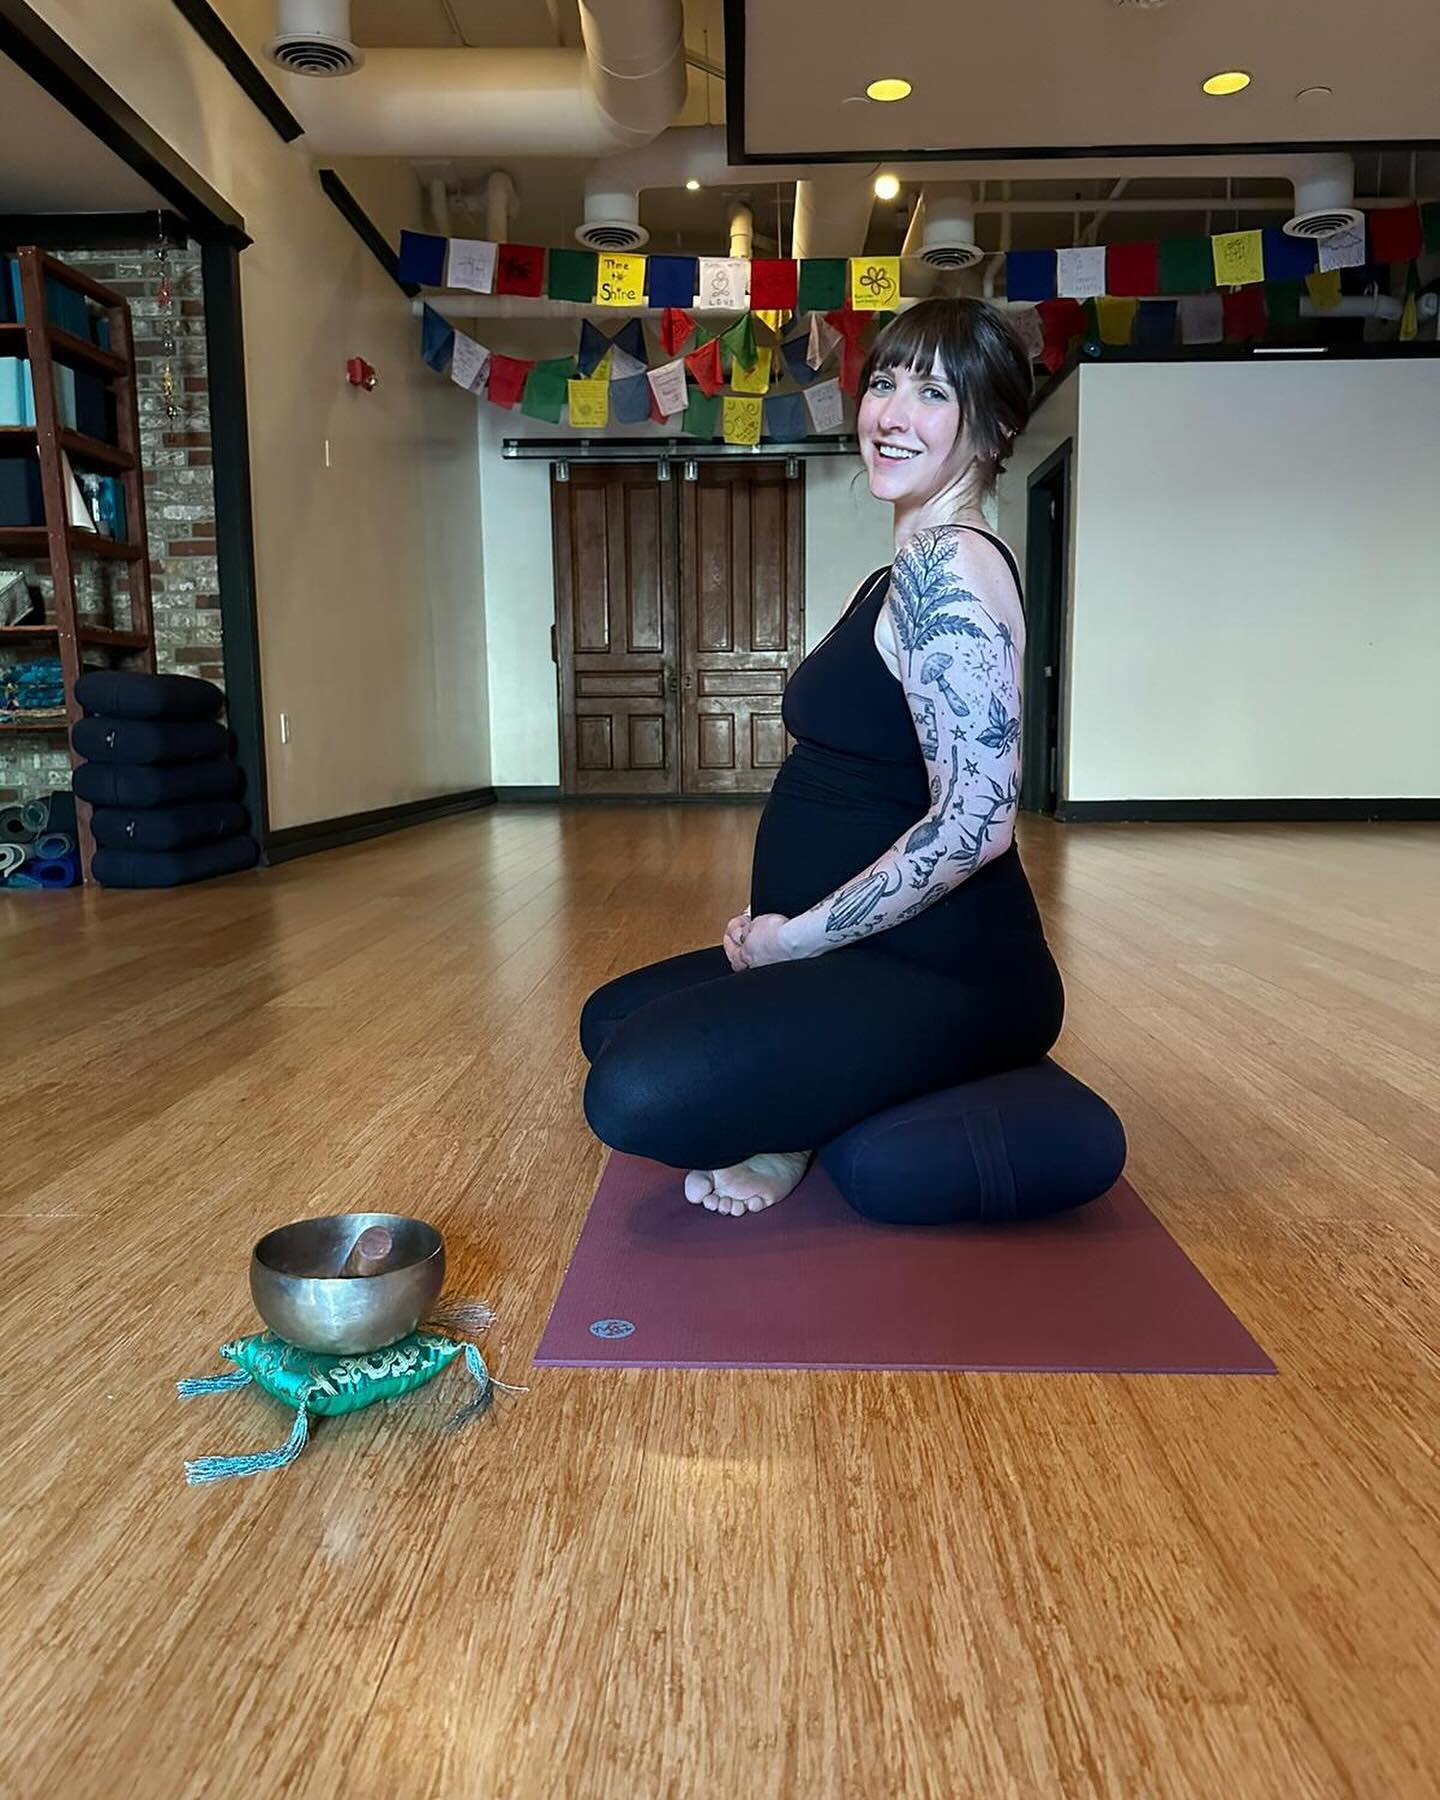 Much love to Courtney Latorre @courtneytaylor_yoga who taught her last class tonight at Yoga Lab! Courtney has been teaching at the studio since 2018 and is getting ready for some new exciting life transitions! We&rsquo;re so thankful for all of the 